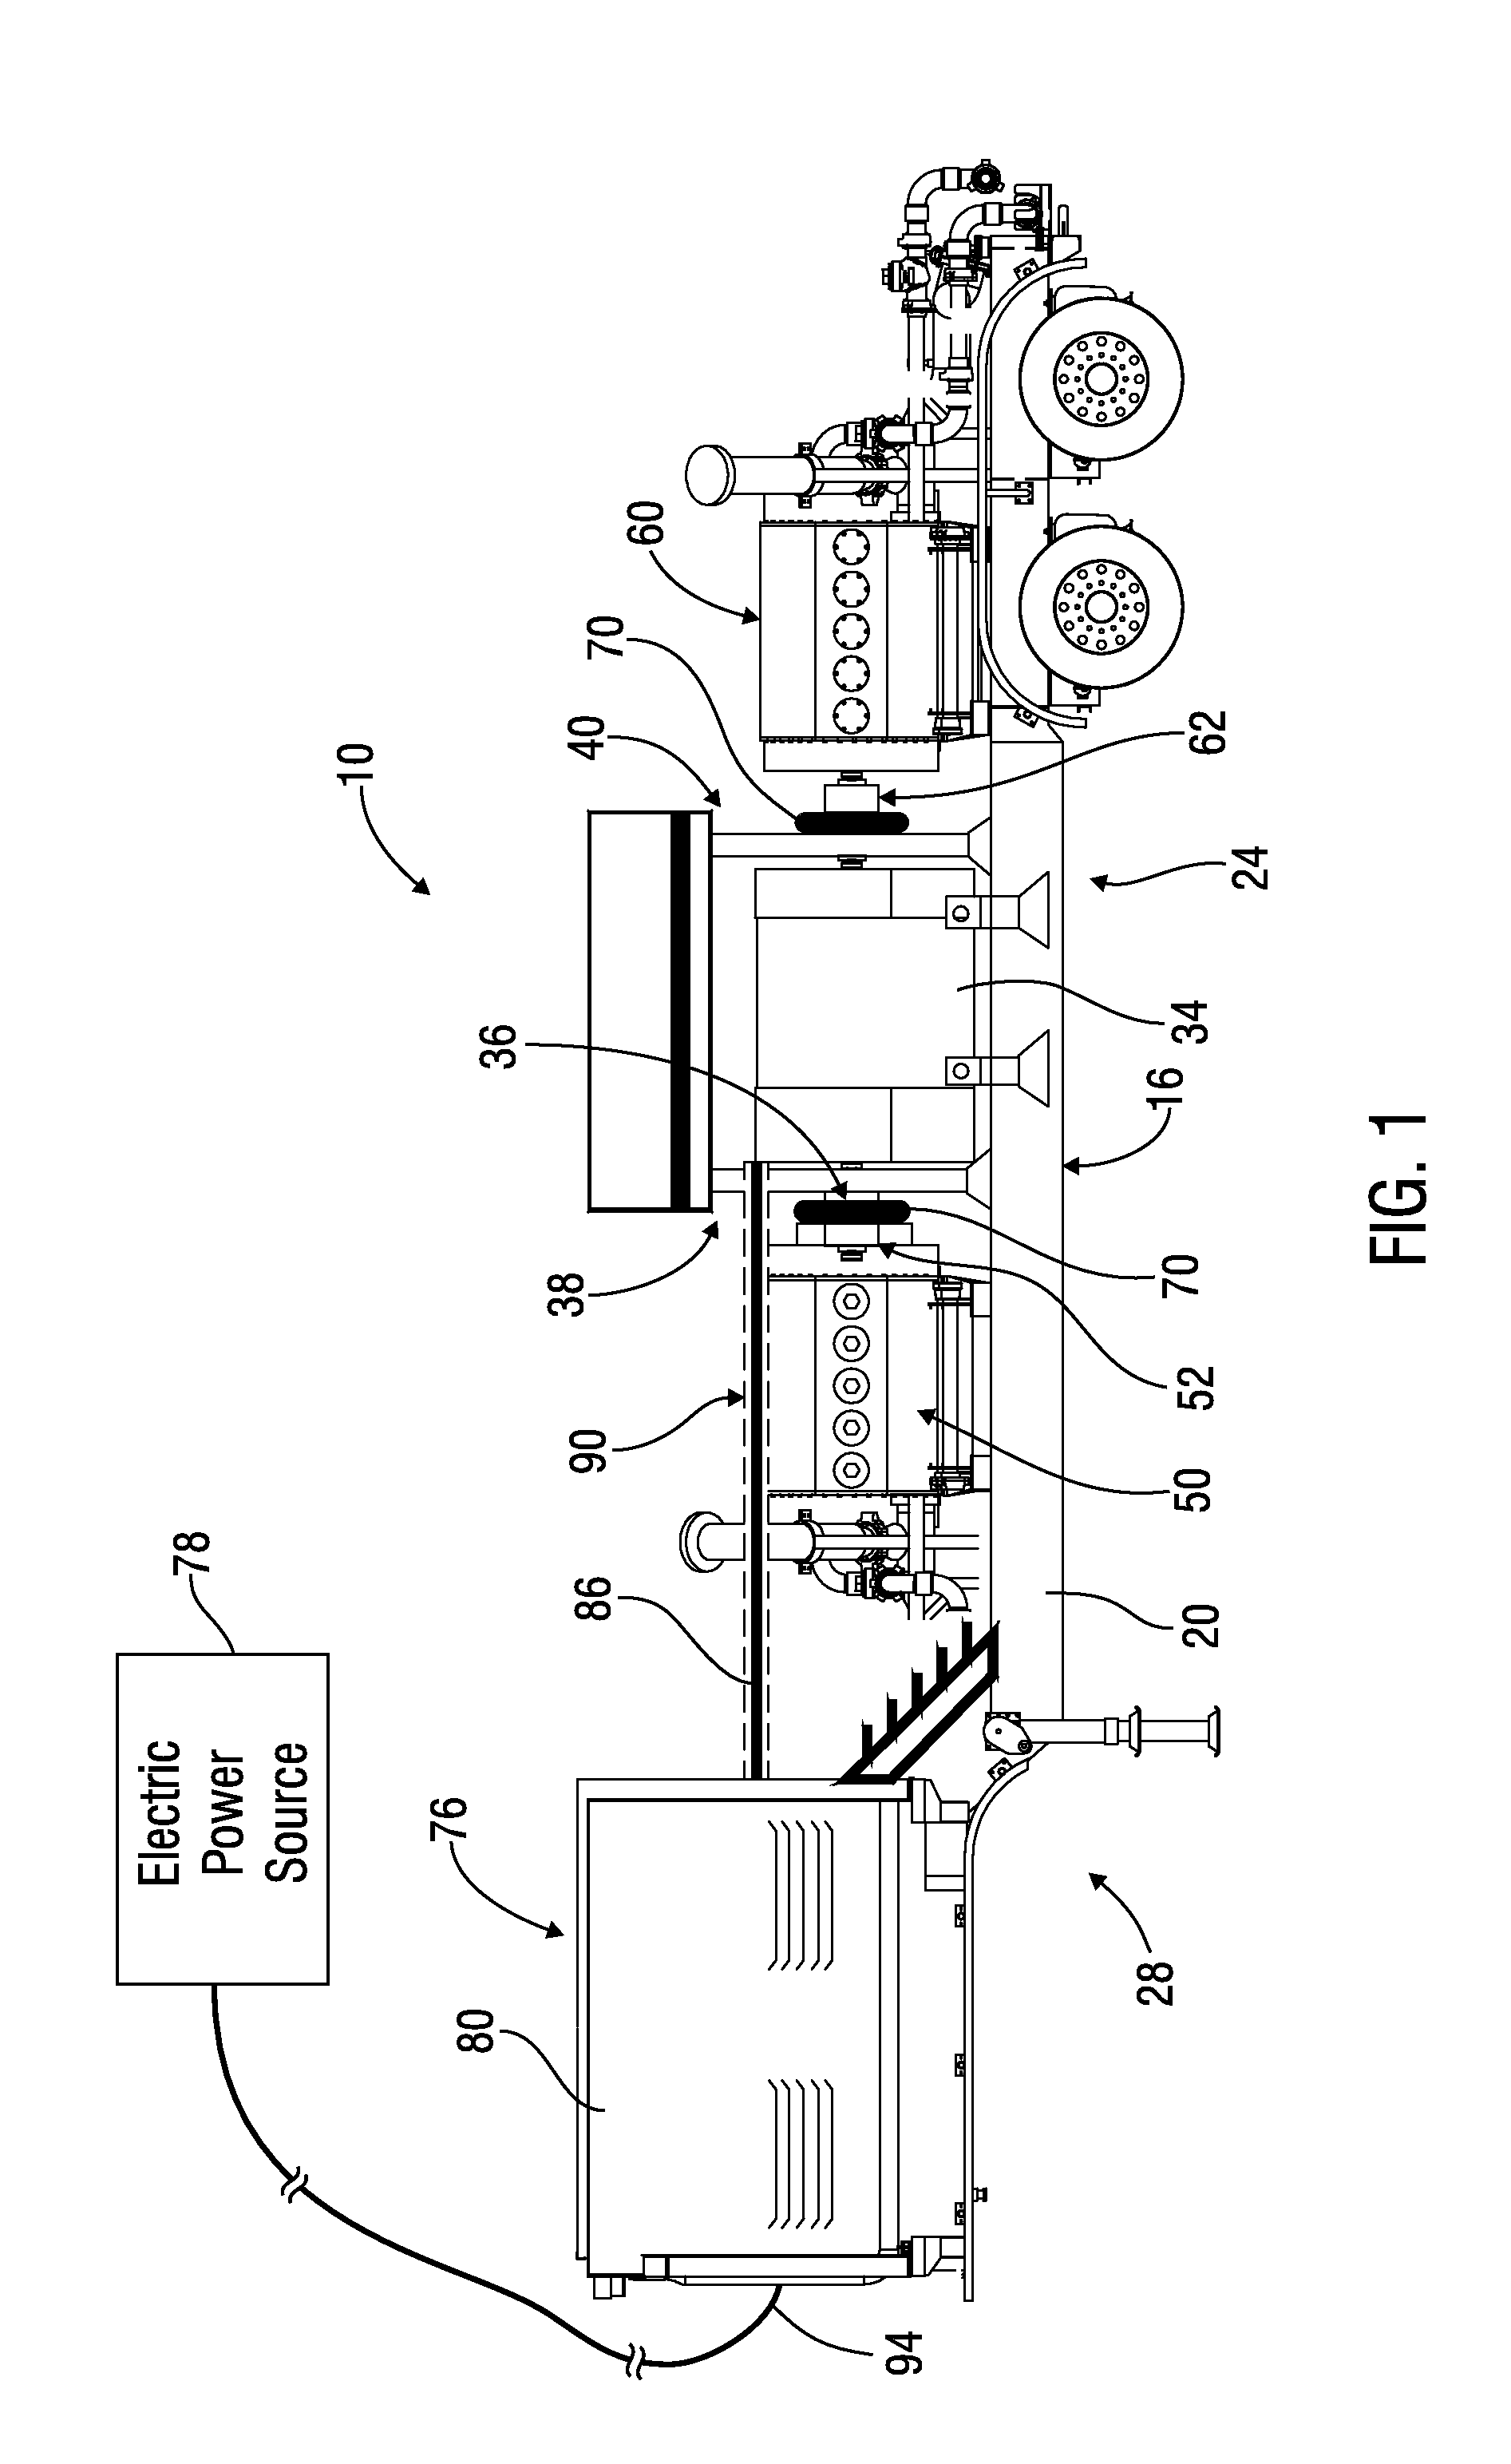 Apparatus and methods for delivering a high volume of fluid into an underground well bore from a mobile pumping unit